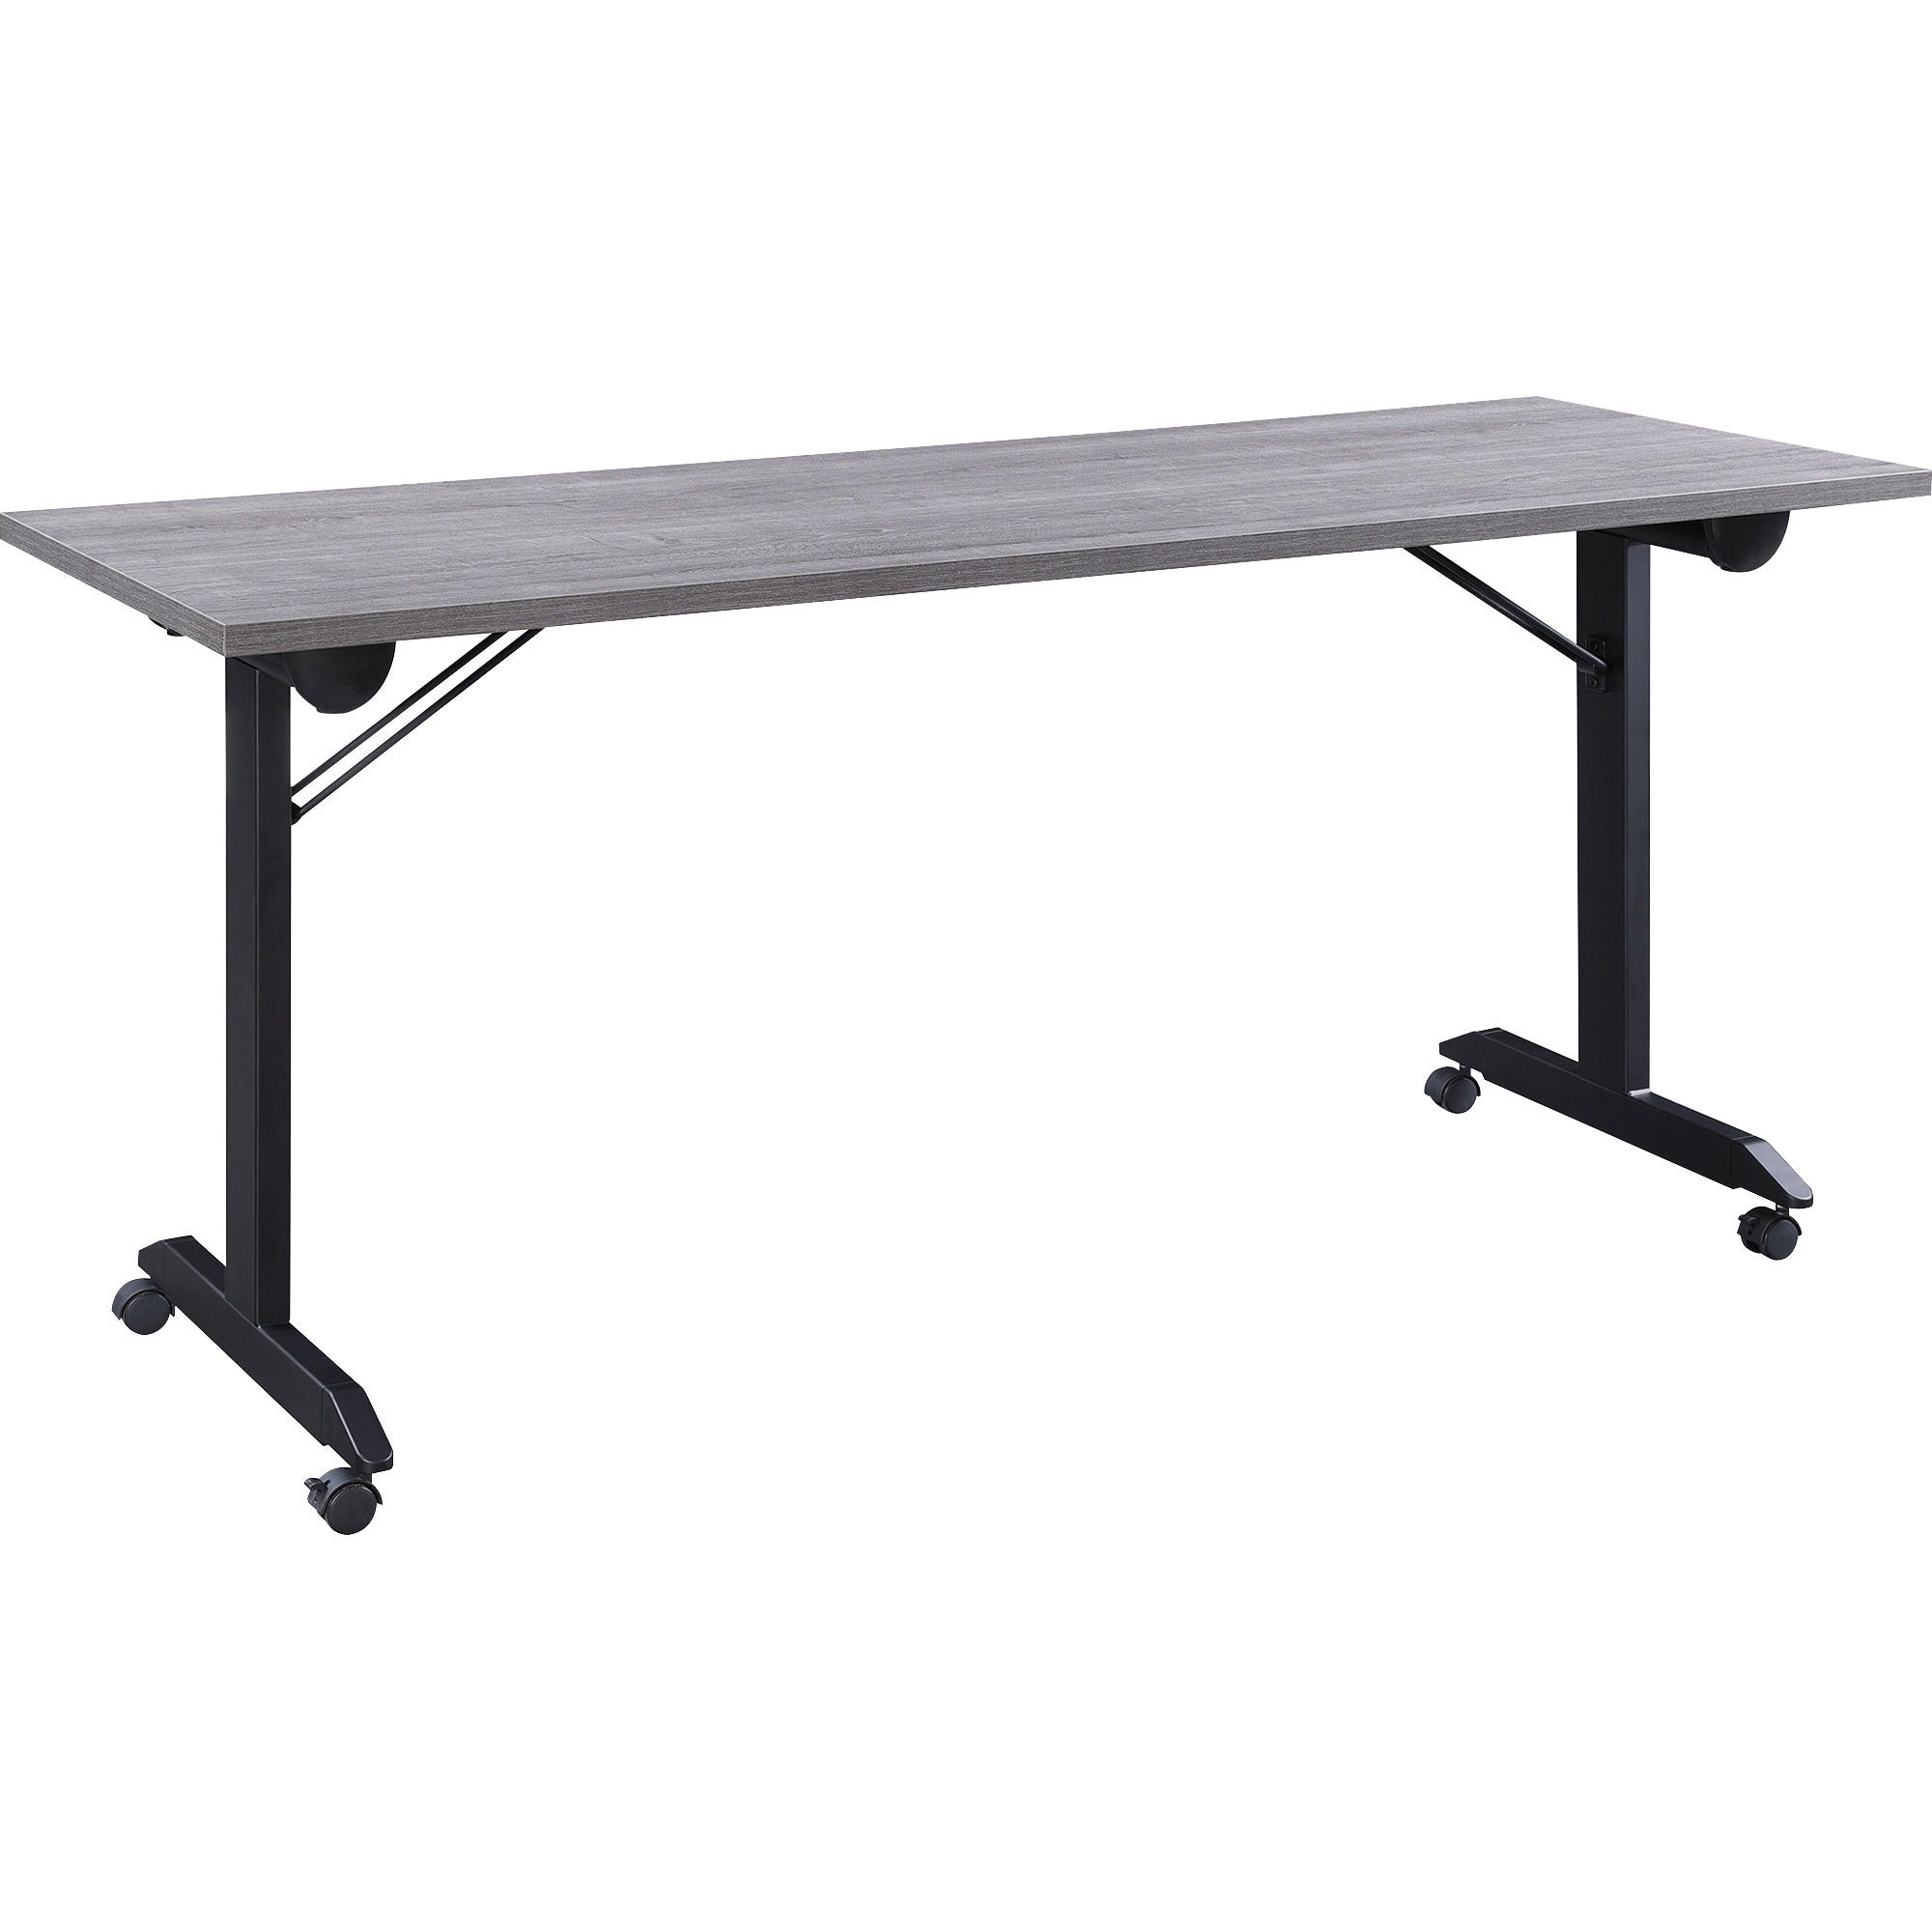 lorell-mobile-folding-training-table-for-table-toprectangle-top-powder-coated-base-200-lb-capacity-x-63-table-top-width-2950-height-x-63-width-x-24-depth-assembly-required-weathered-charcoal-1-each_llr60736 - 1